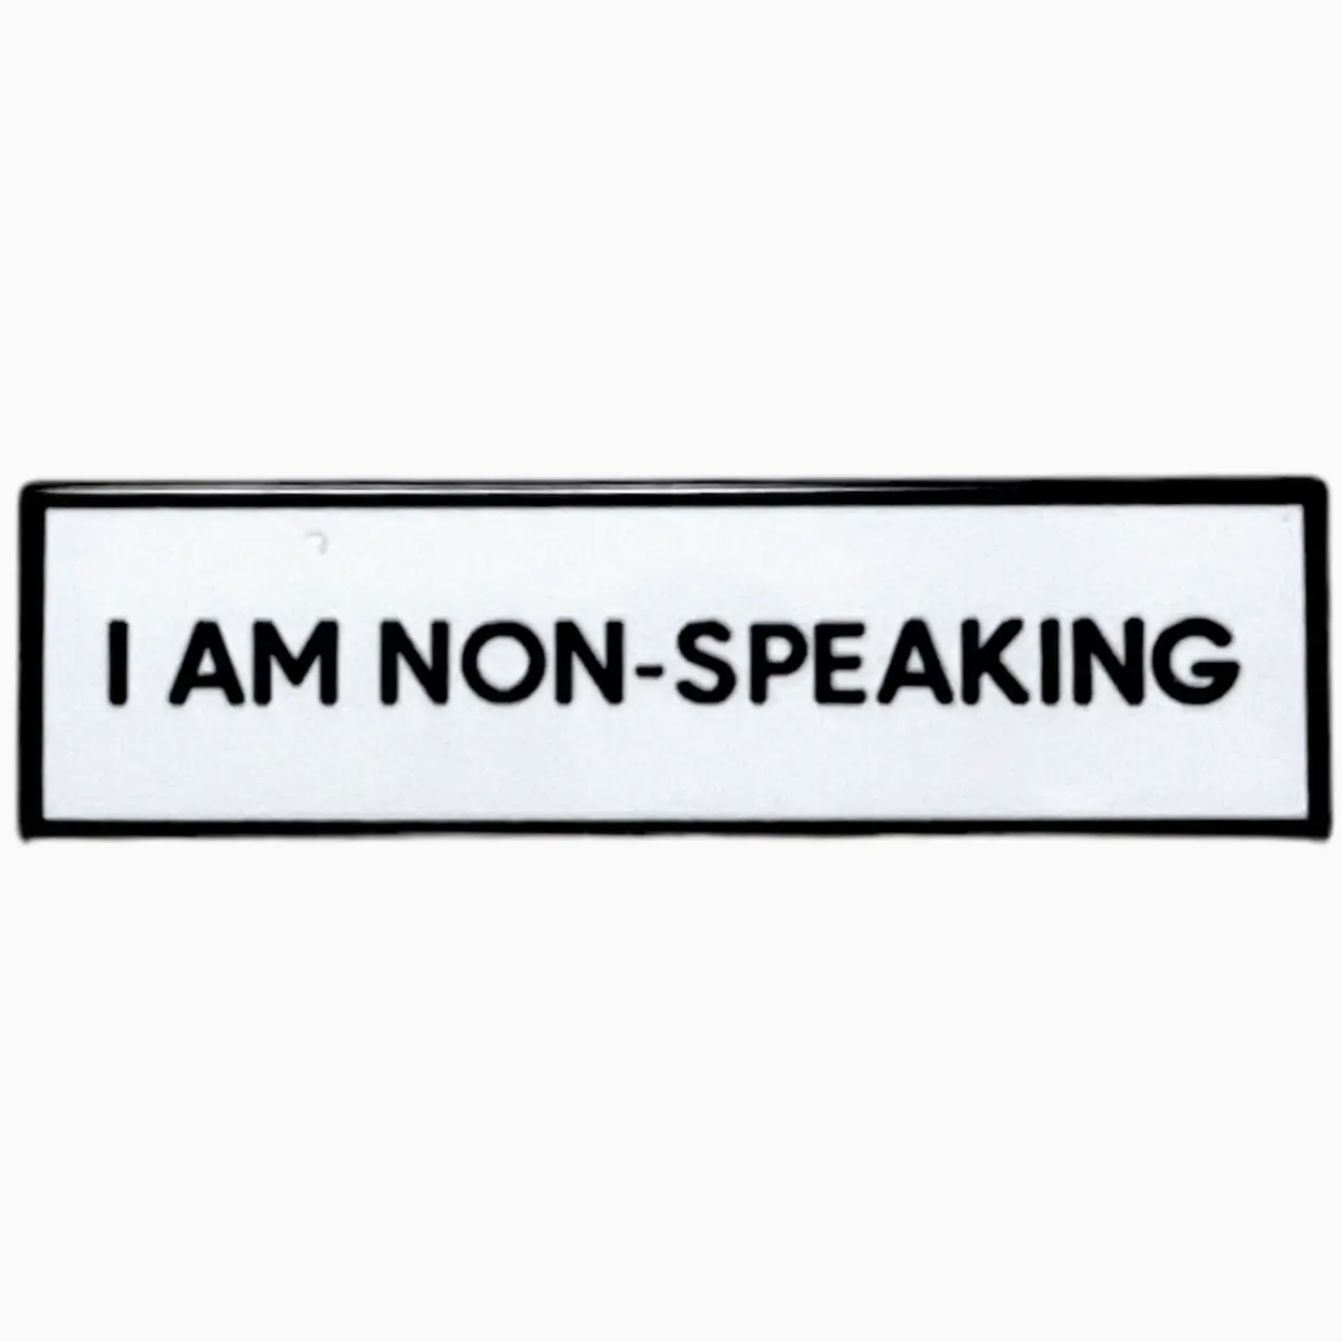 I am Non-Speaking Patch